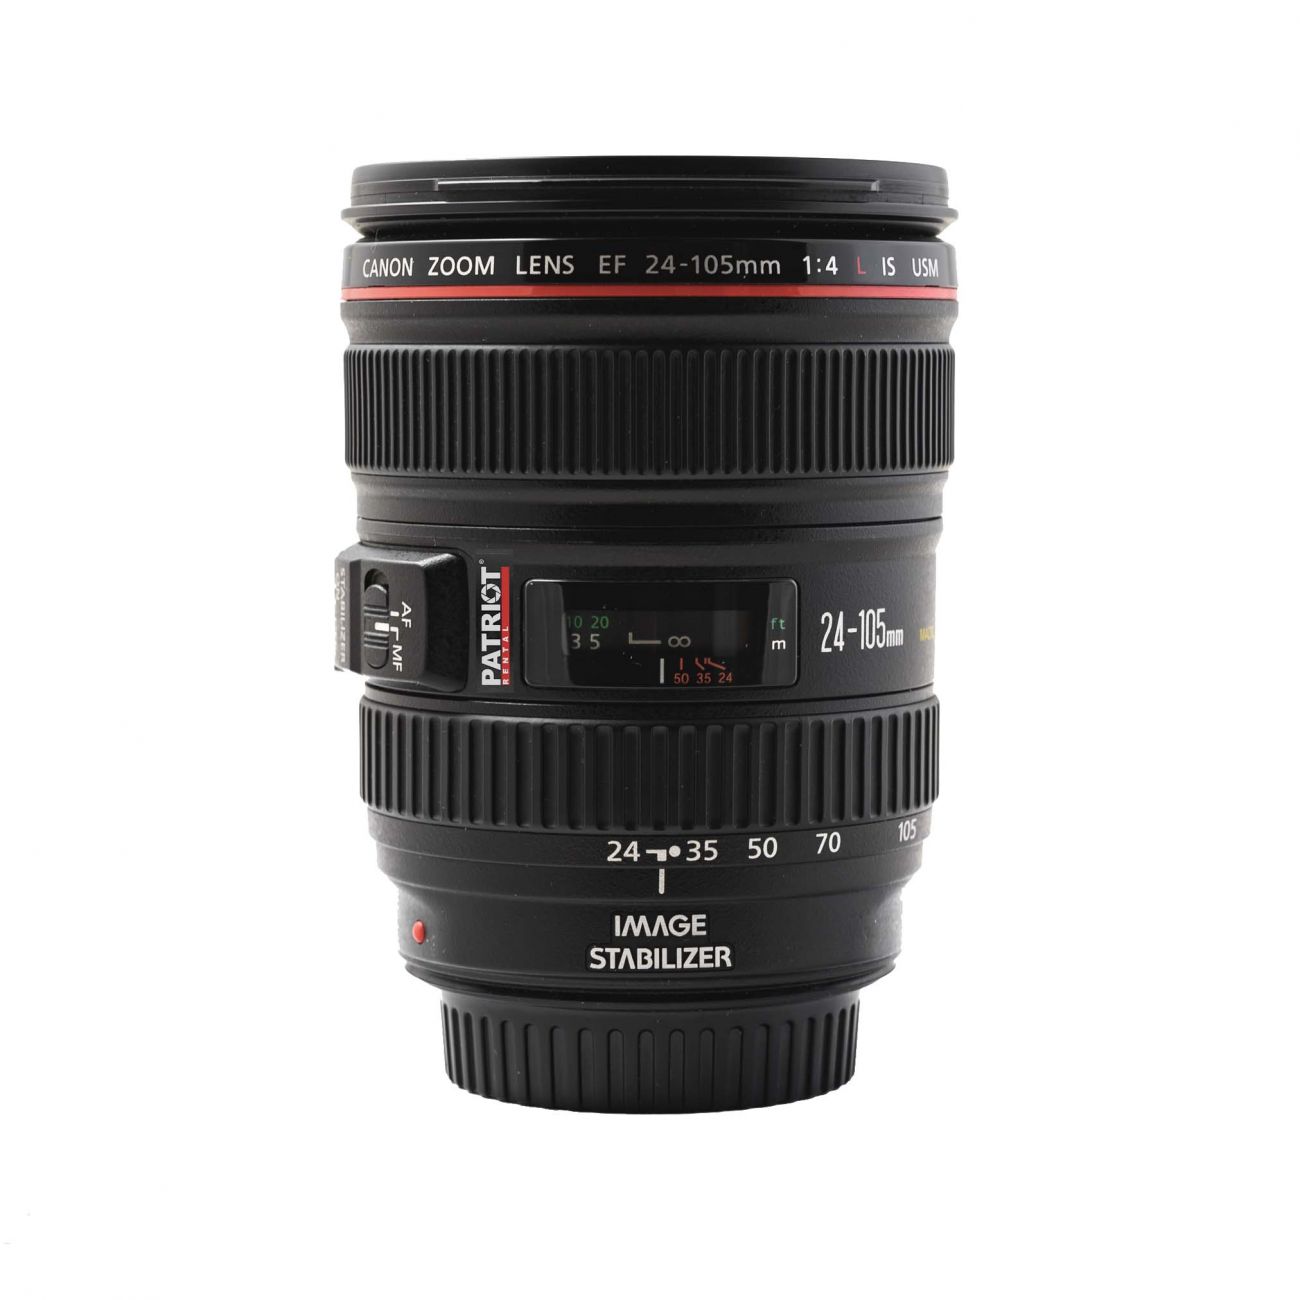 24-105mm Canon zoom lens f/4 L IS USM